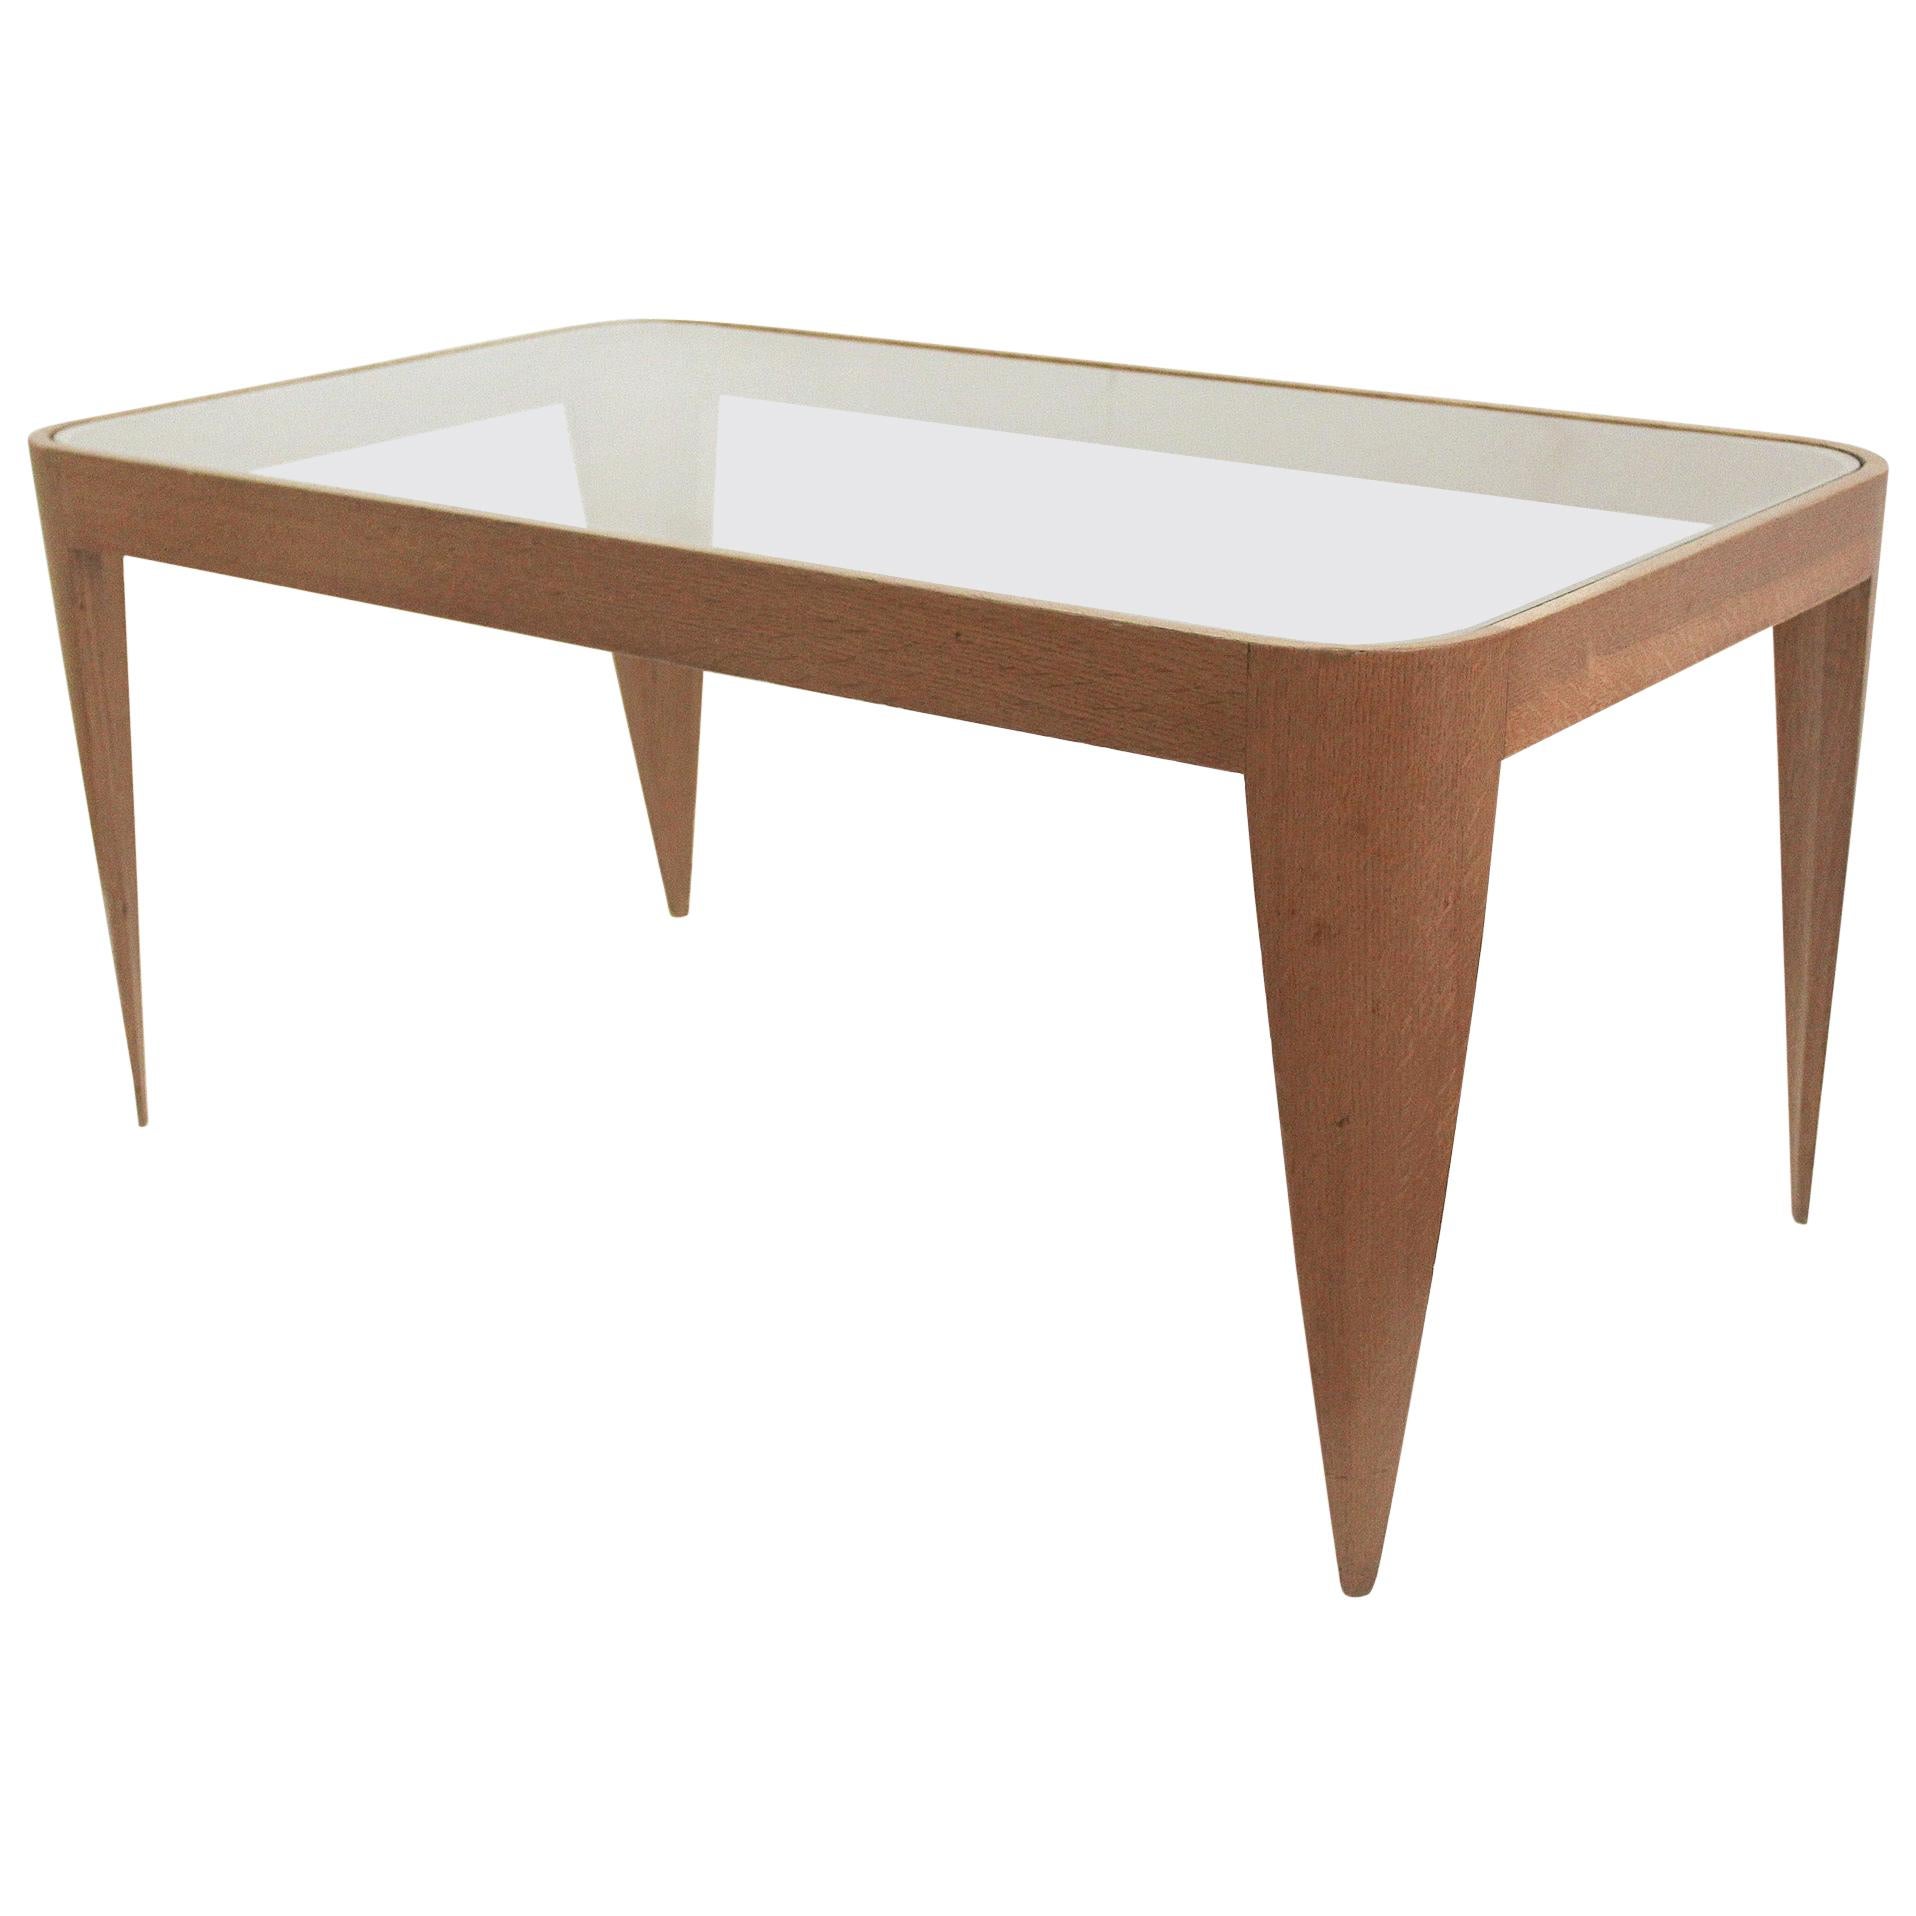 Oak and Glass Coffee Table by Gio Ponti, Italy 1940